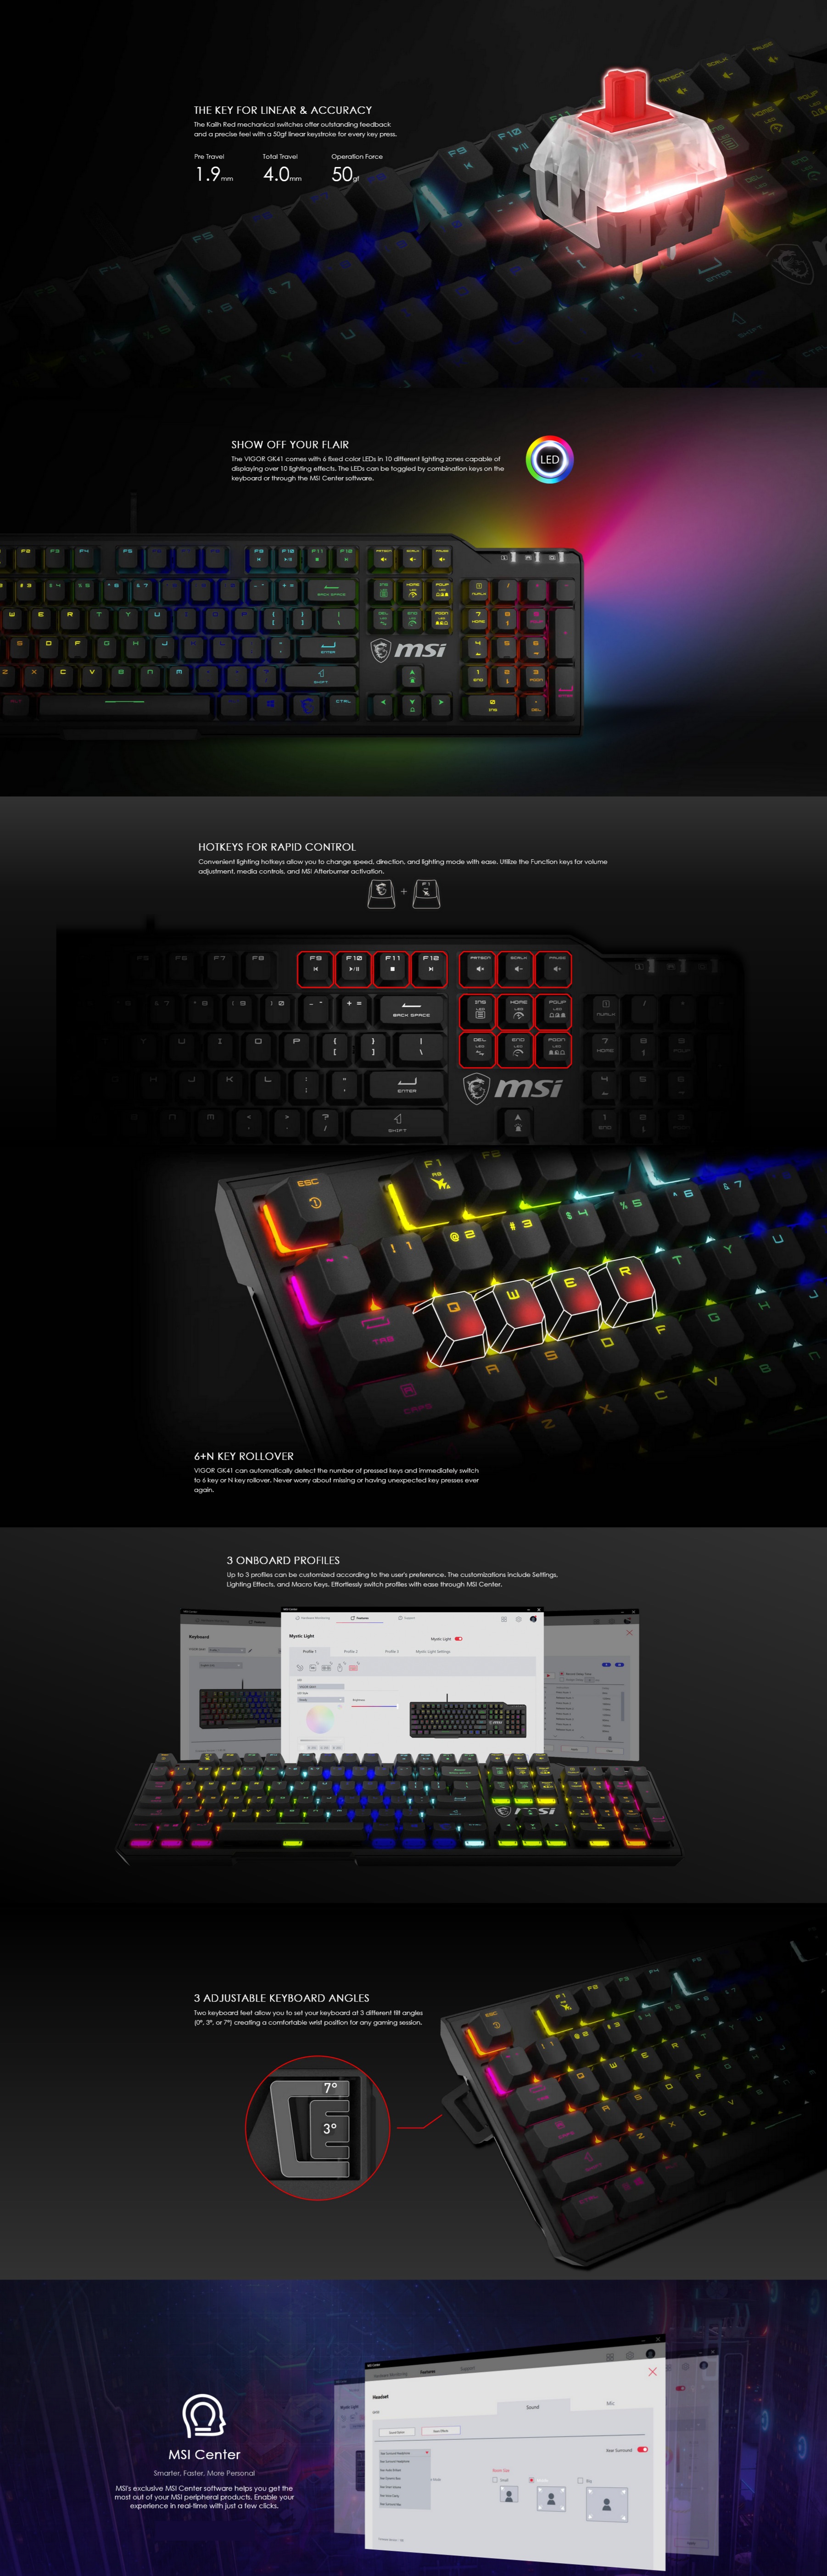 A large marketing image providing additional information about the product MSI VIGOR GK41 Gaming Keyboard - Kailh Red - Additional alt info not provided